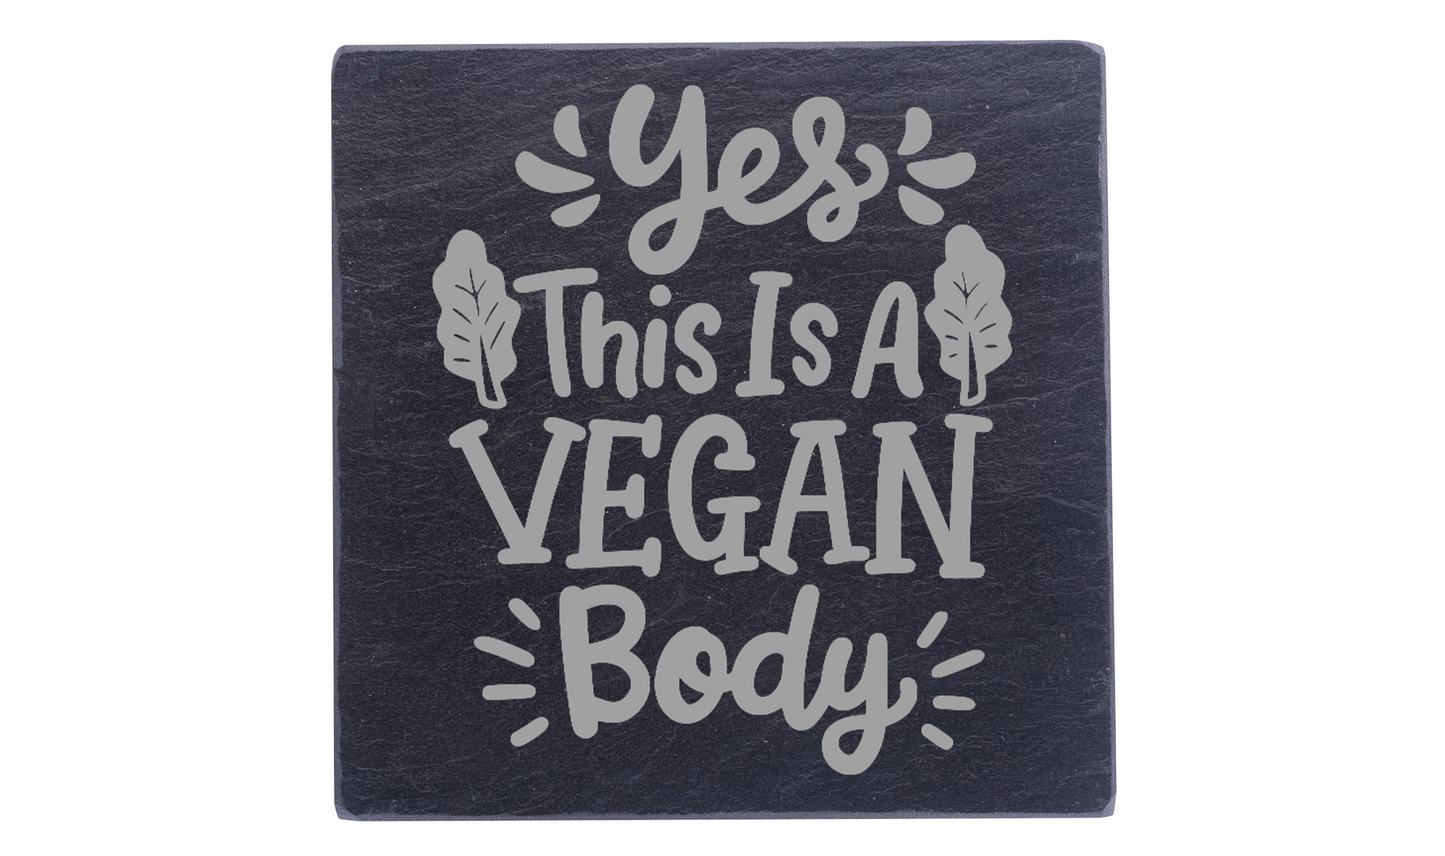 Yes, This Is A Vegan Body